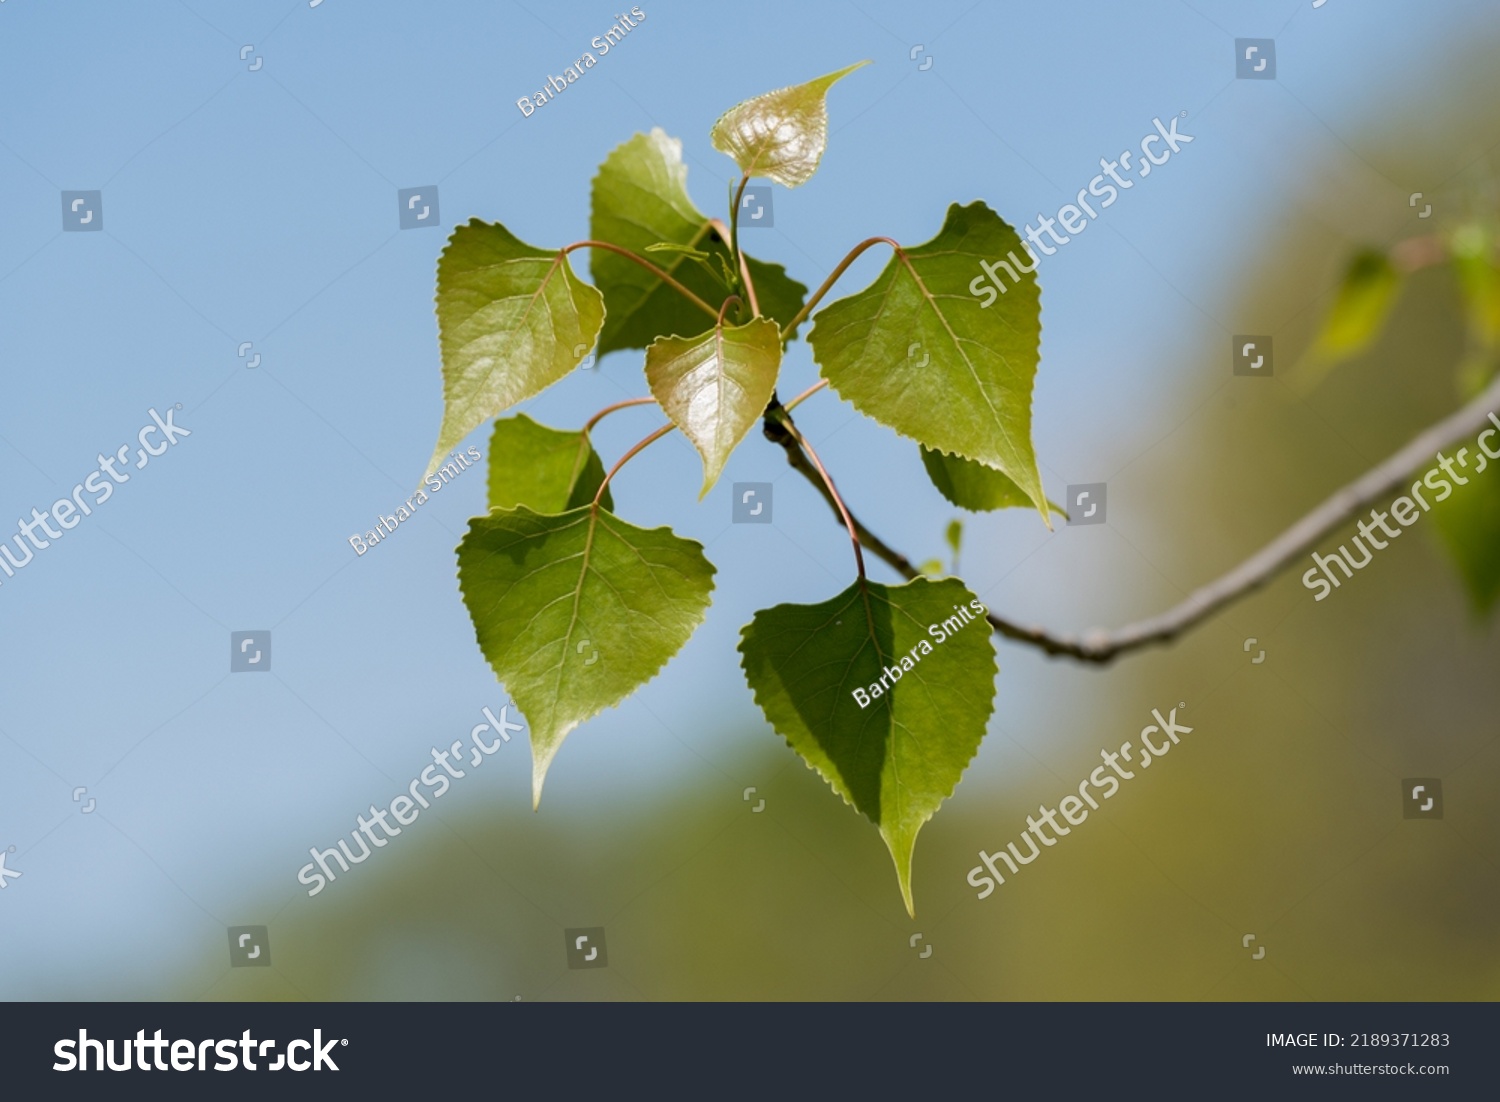 A single grouping of poplar leaves in spring against a blue sky background. #2189371283